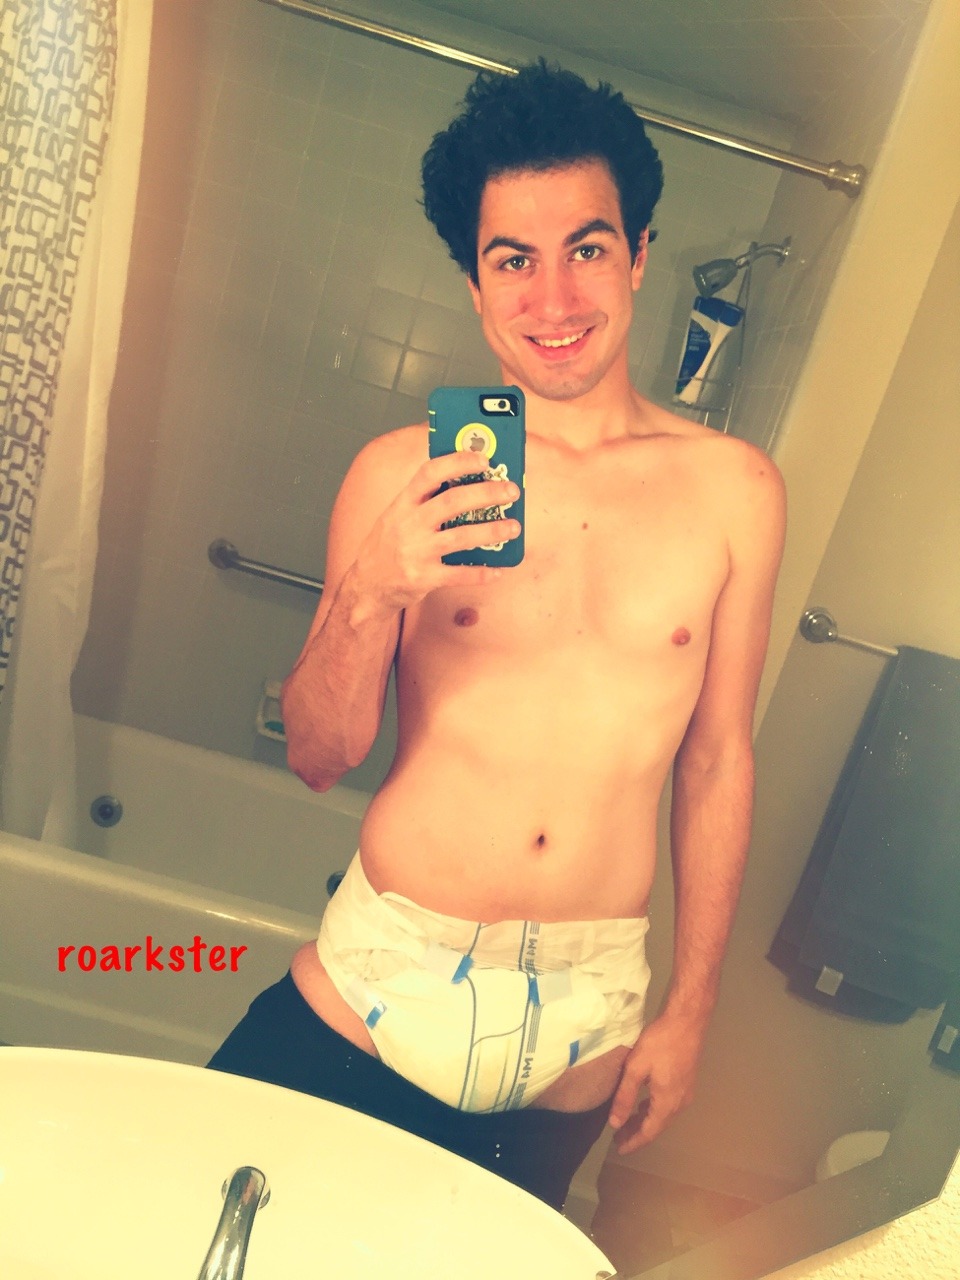 roarkster:Baby wet his diaper last night again in his sleep. That doesn’t mean